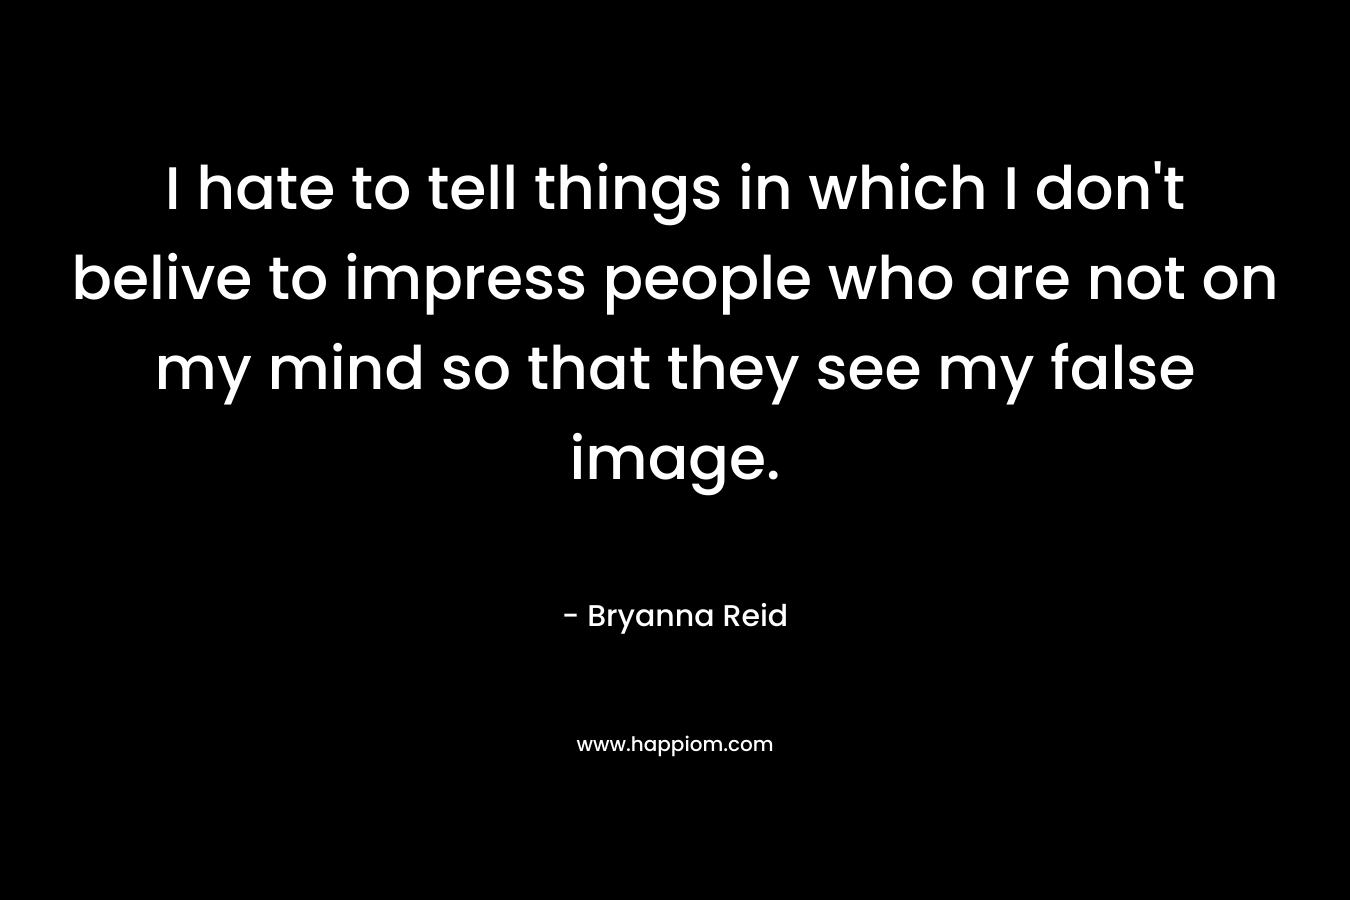 I hate to tell things in which I don’t belive to impress people who are not on my mind so that they see my false image. – Bryanna Reid